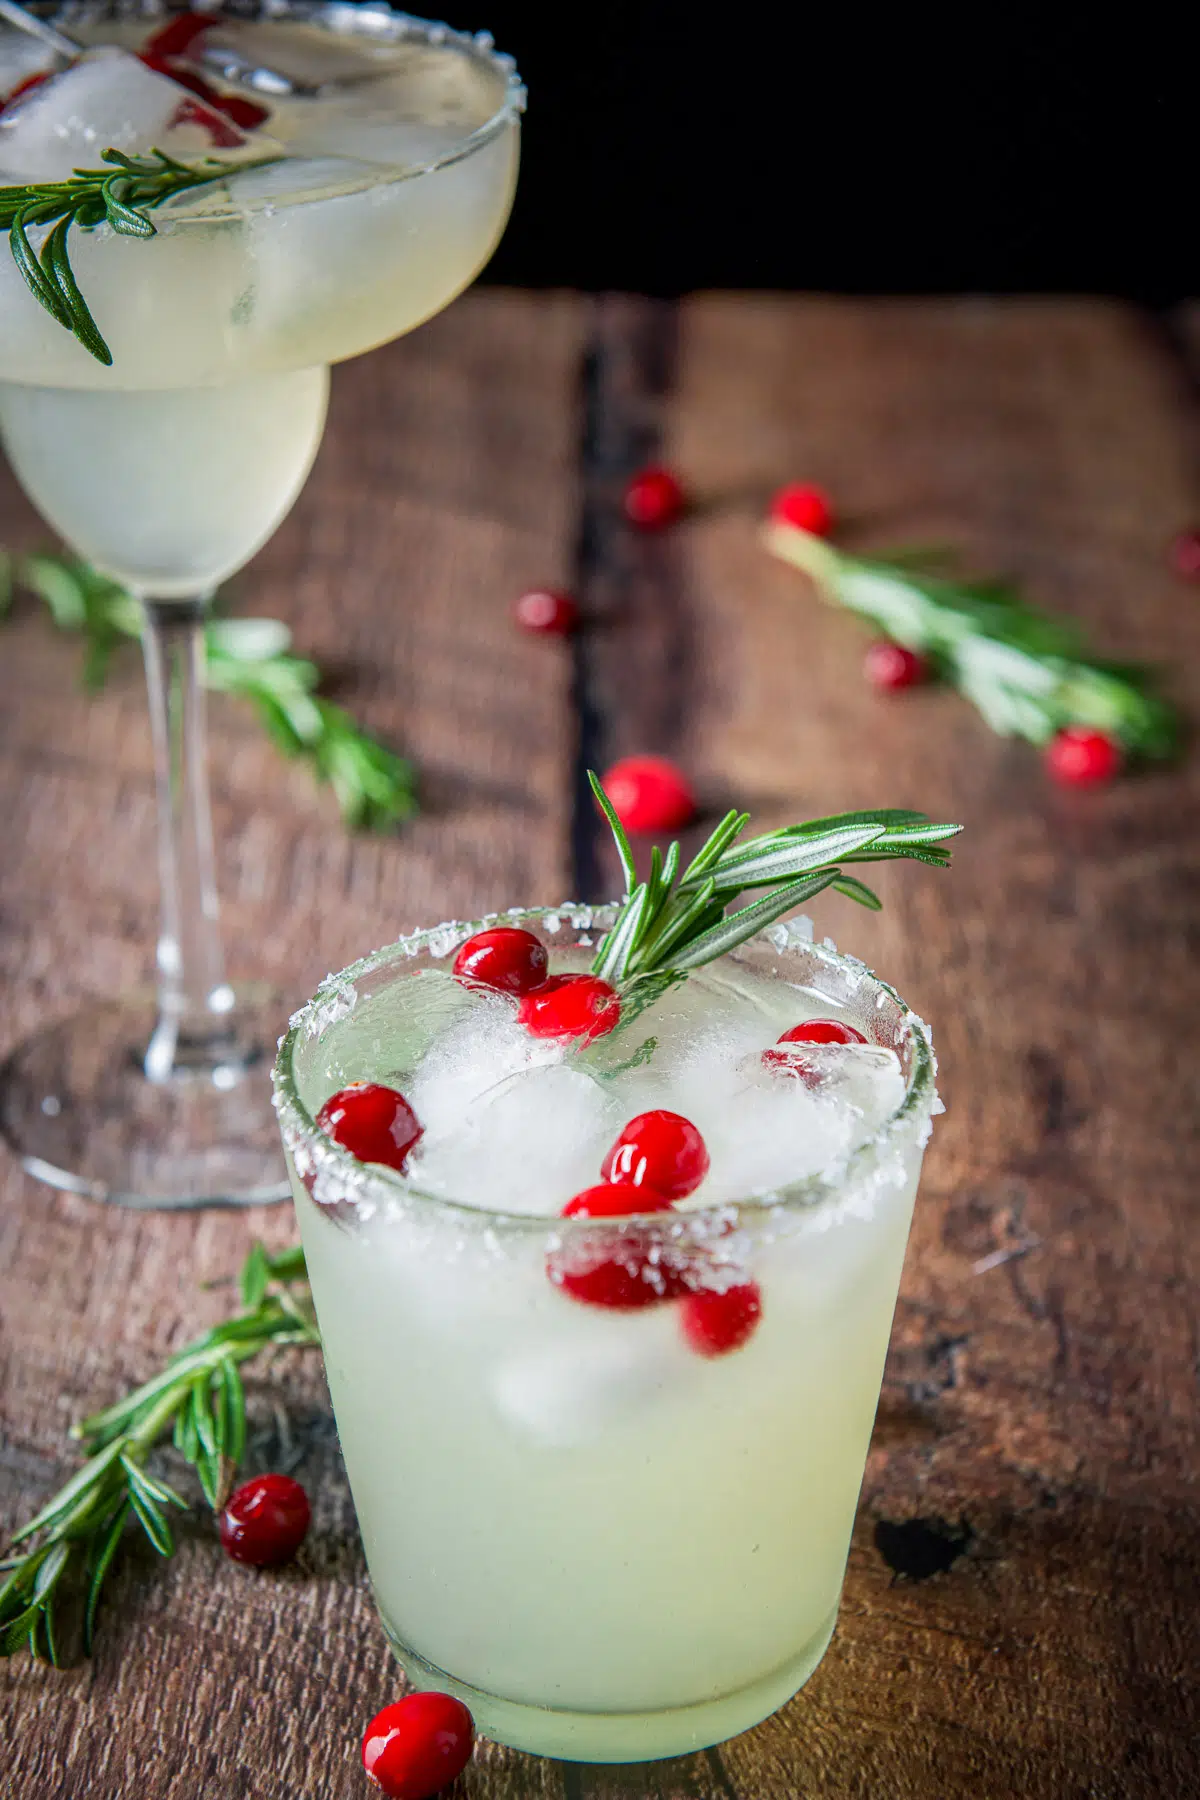 Closer view of the mistletoe margarita with green and red garnish